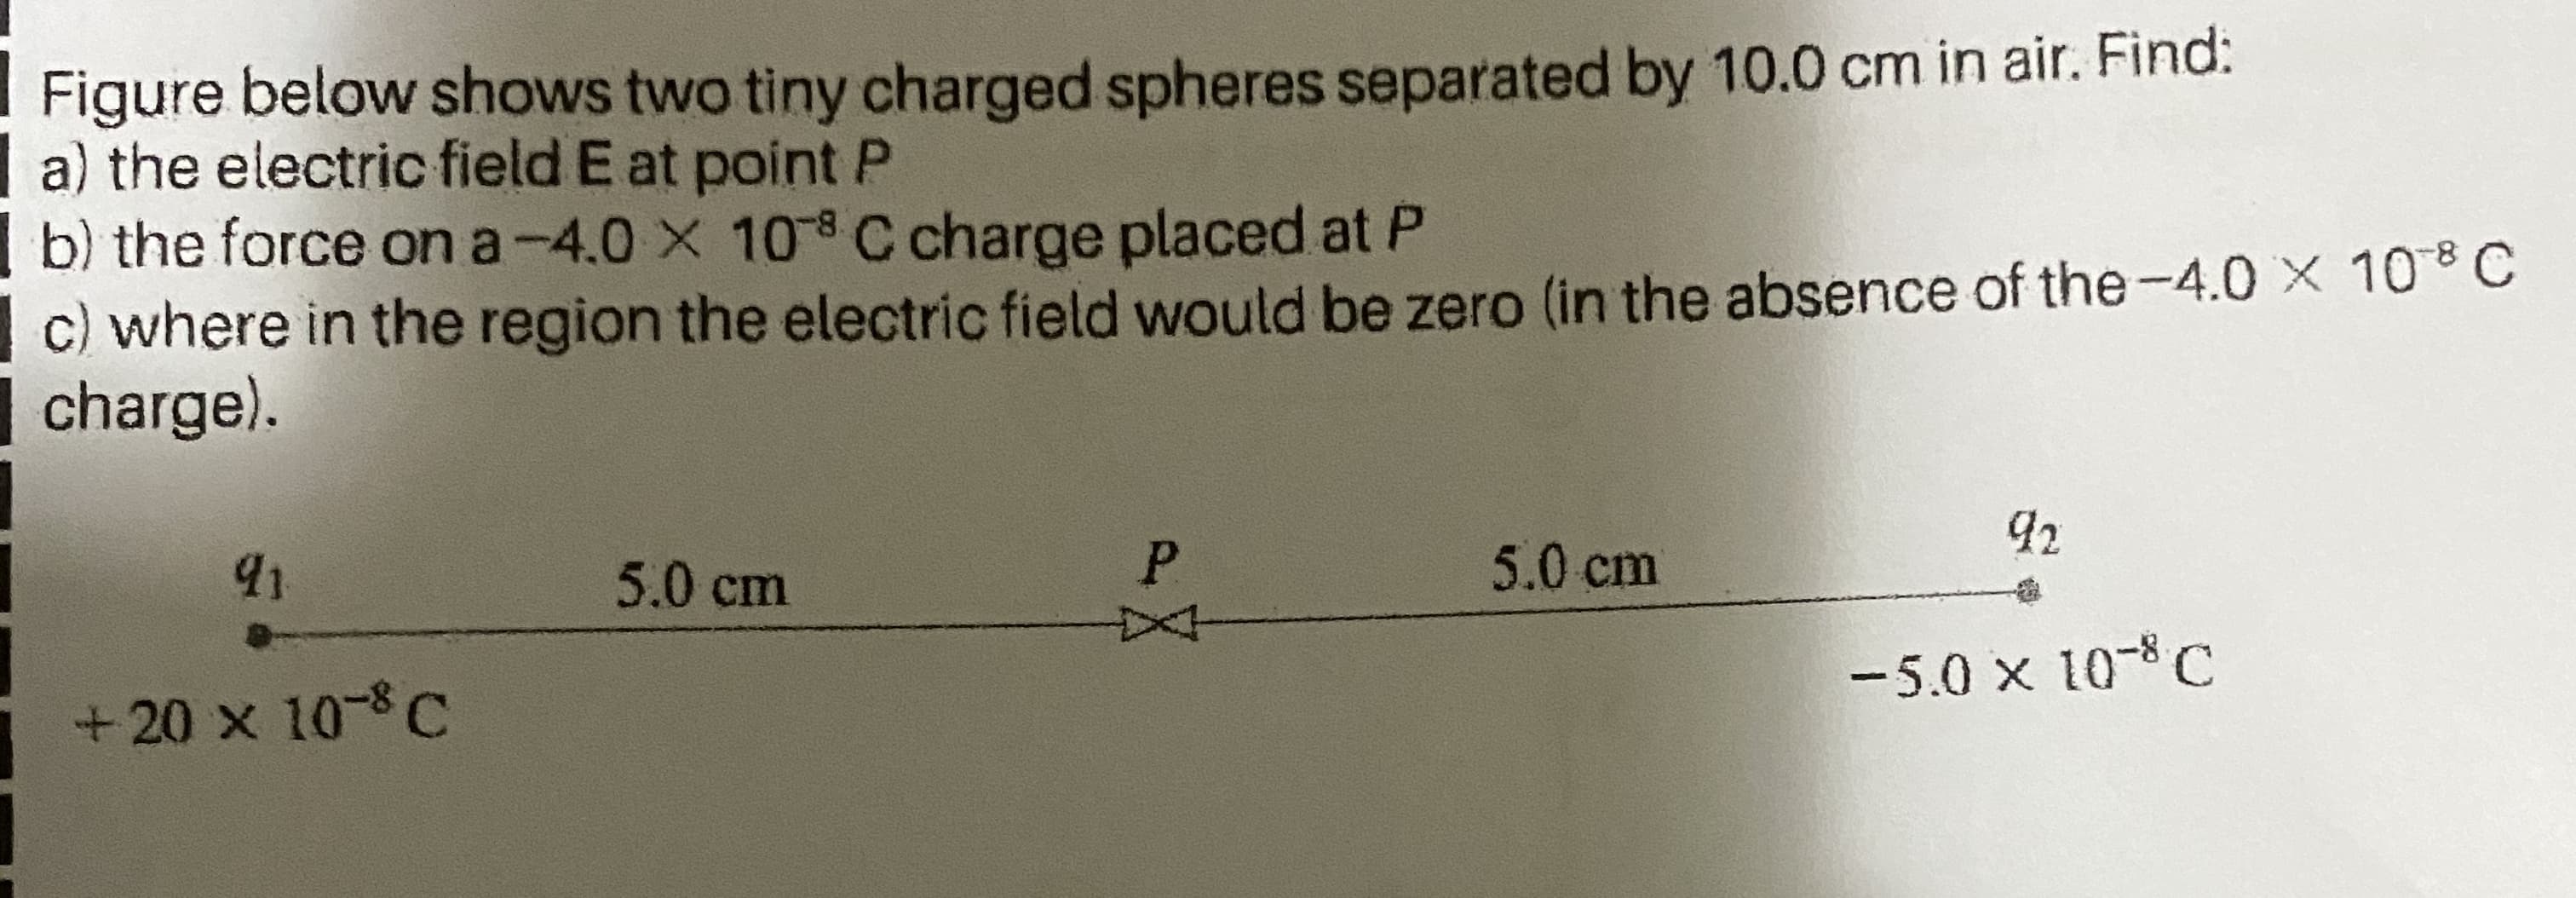 Figure below shows two tiny charged spheres separated by 10.0 cm in air. Find:
a) the electric field E at point P
b) the force on a-4.0 X 108 C charge placed at P
c) where in the region the electric field would be zero (in the absence of the-4.0 X 10*C
charge).
92
91
5.0 cm
P.
5.0 cm
-5.0 x 10-C
+20 x 10-8C
